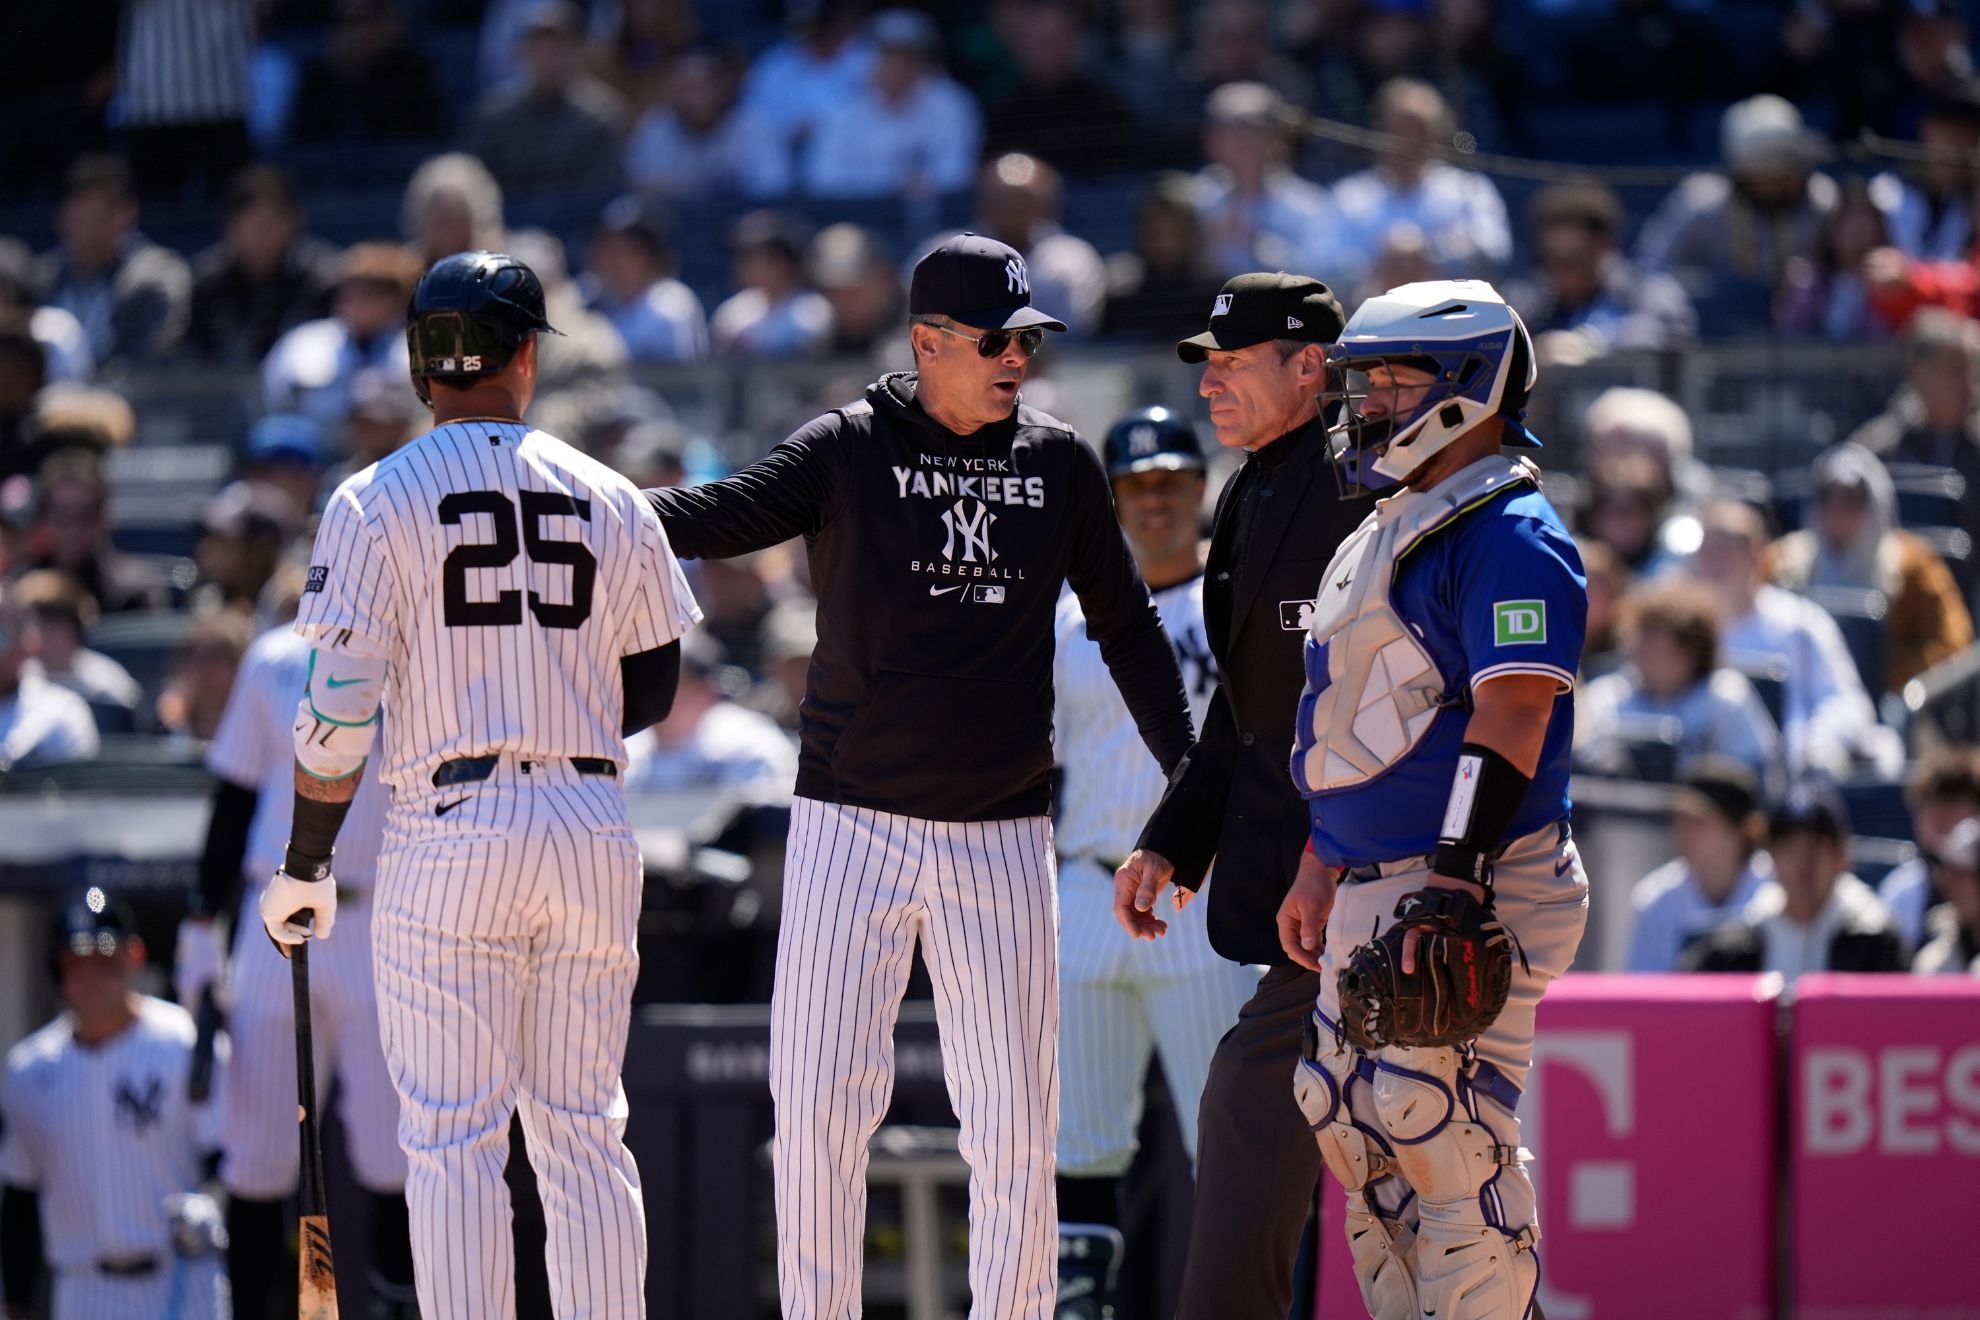 Umpire who wrongfully ejected Aaron Boone might face consequences after his blunder call